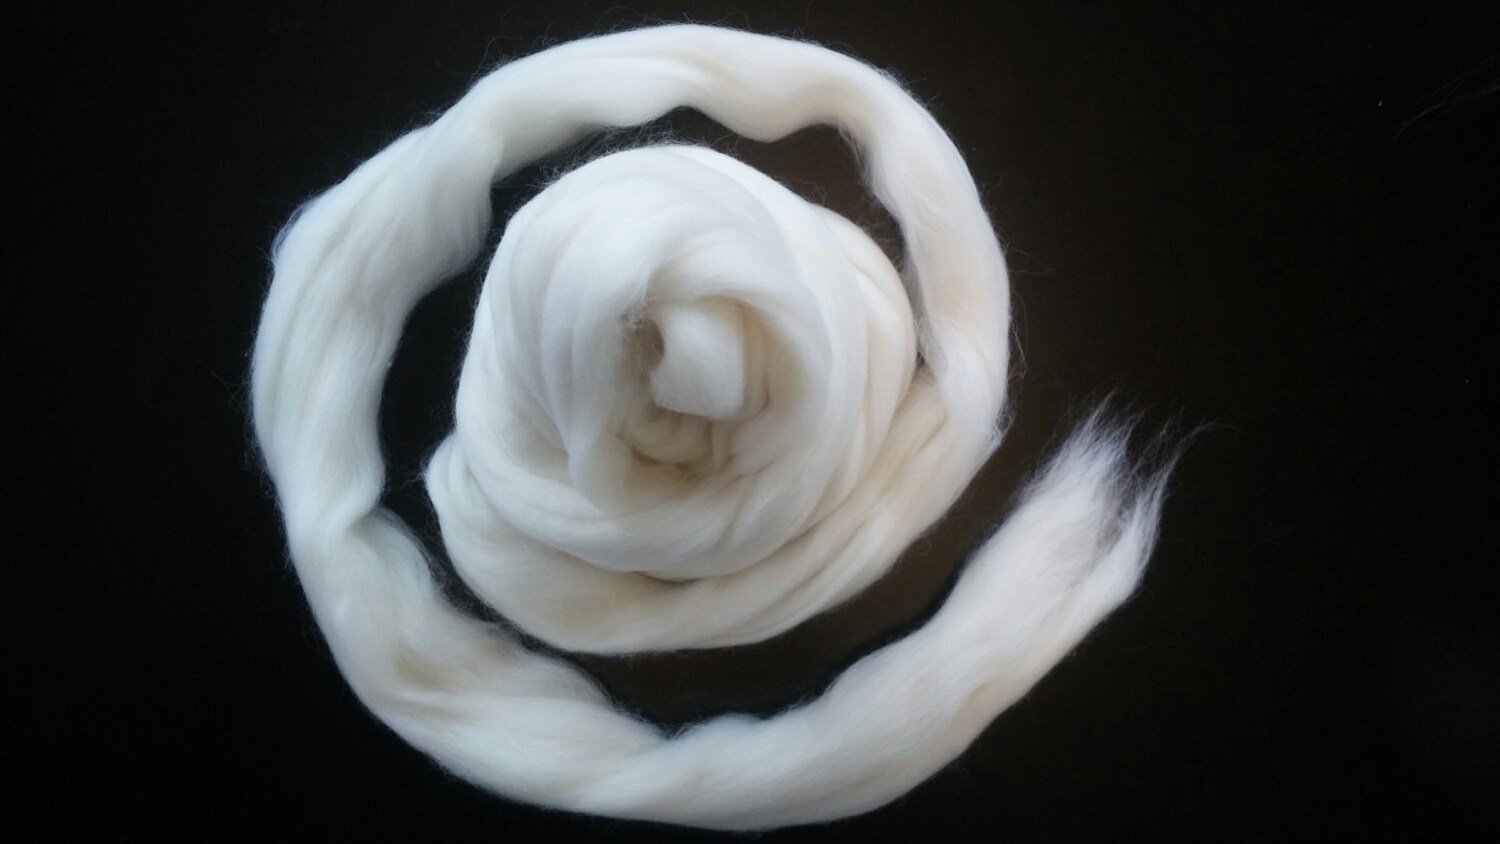 Merino Wool Roving 1 lb (16 Ounces) for Spinning | Soft Chunky Jumbo Yarn  for Arm Knitting Blanket |100% Natural Undyed (Off-White) Wool Yarn,  Felting